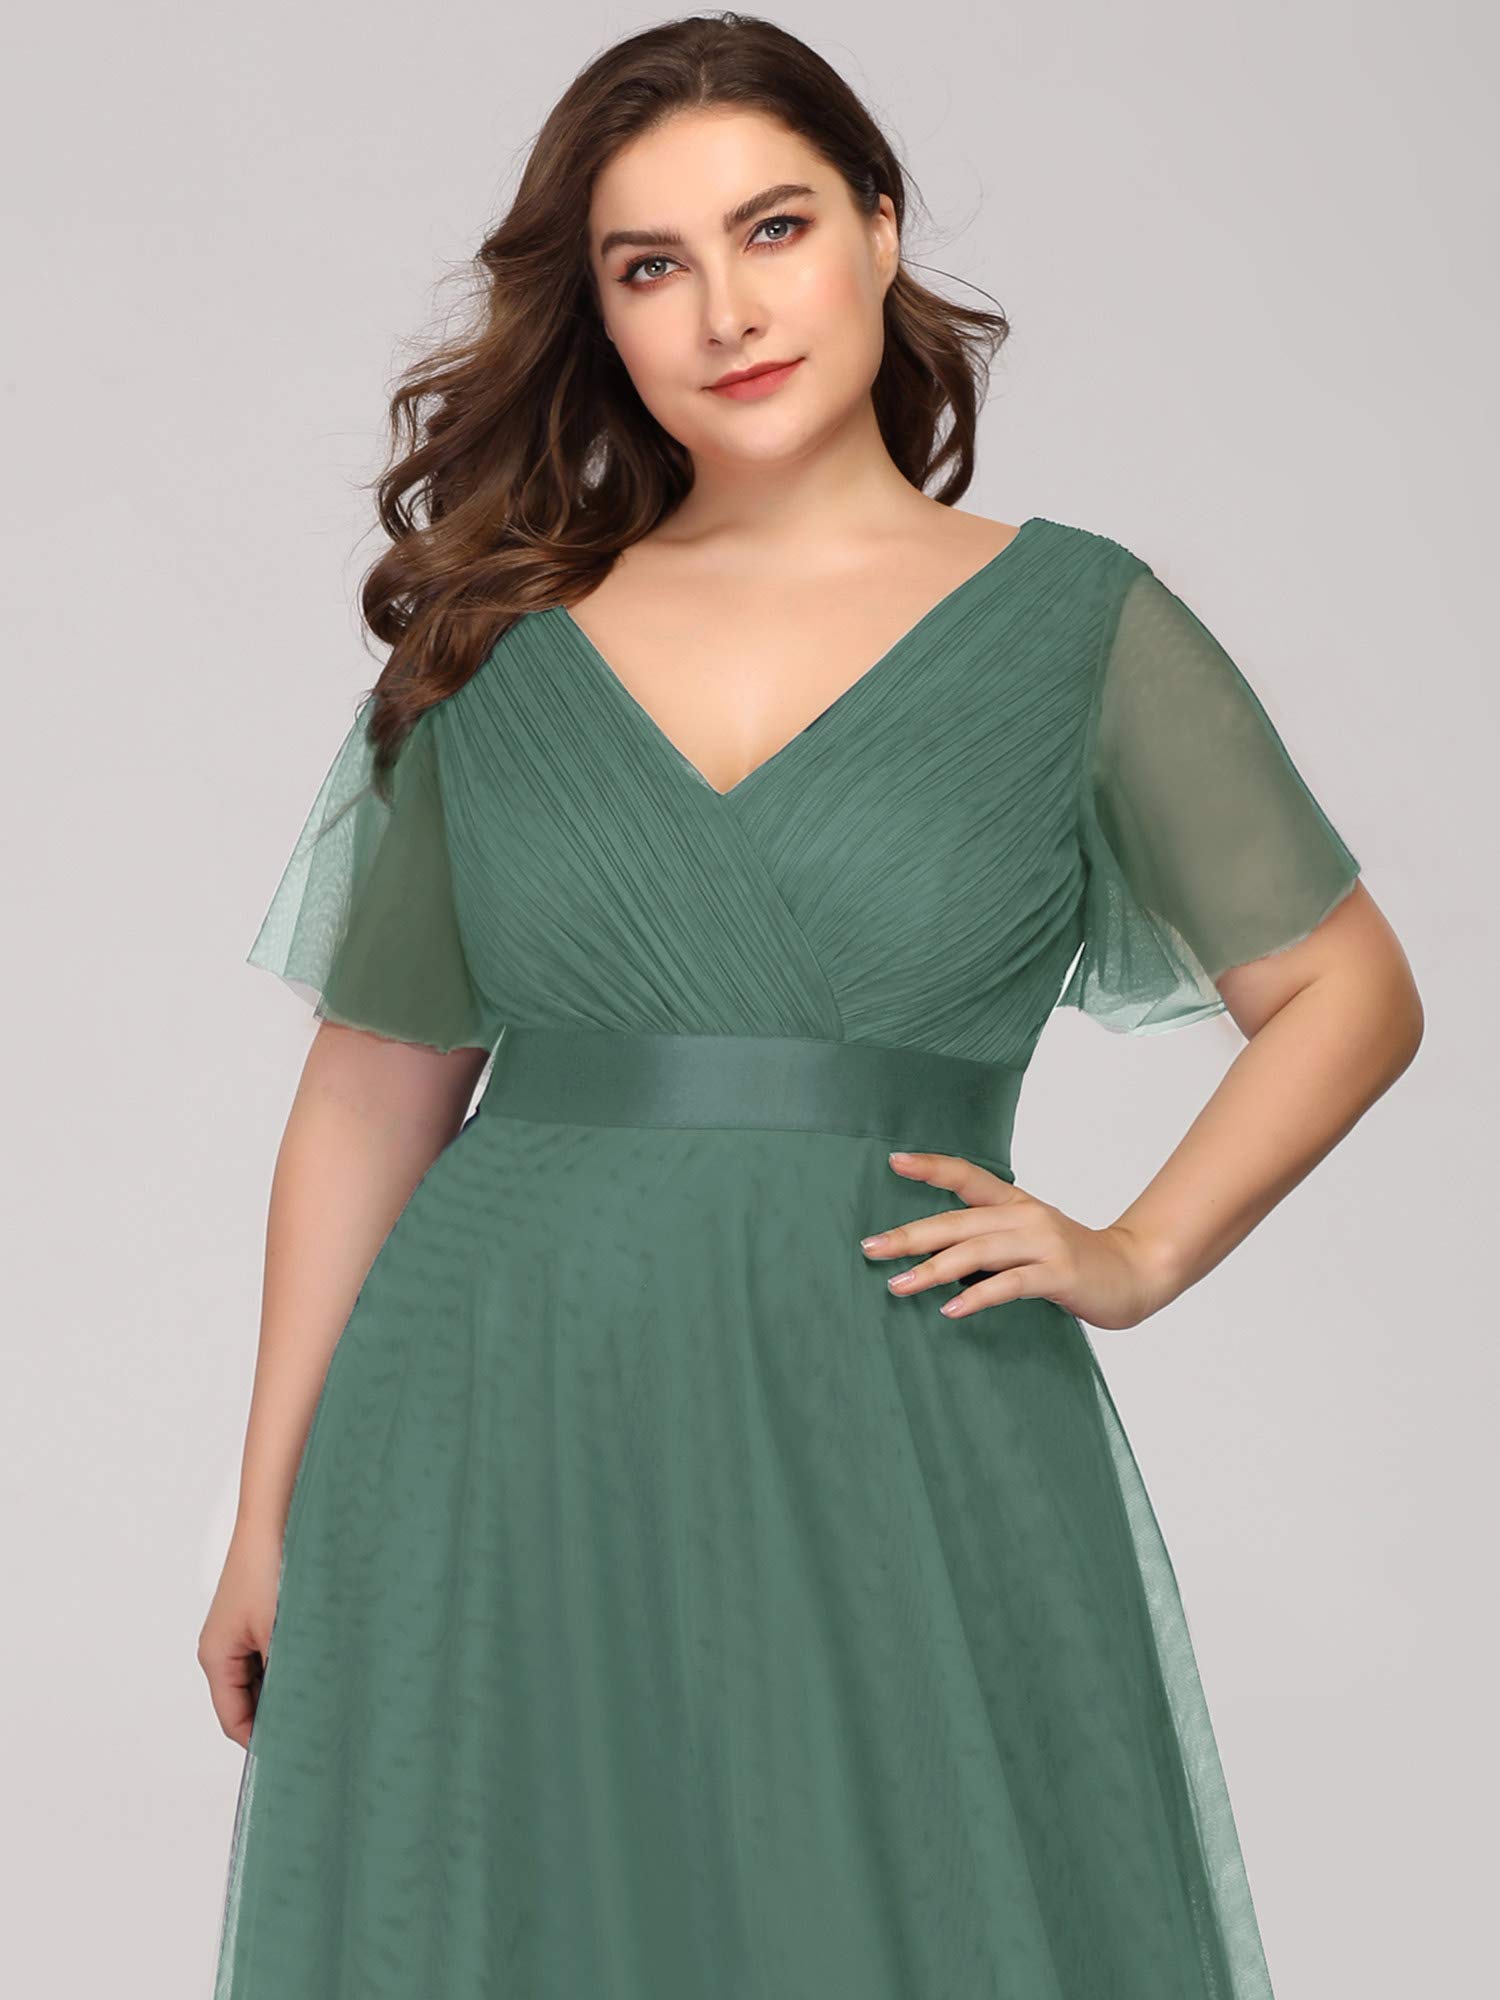 Ever-Pretty Women's Ruffle Sleeves Double V-Neck Tulle Wedding Party Dresses Plus Size Green US20